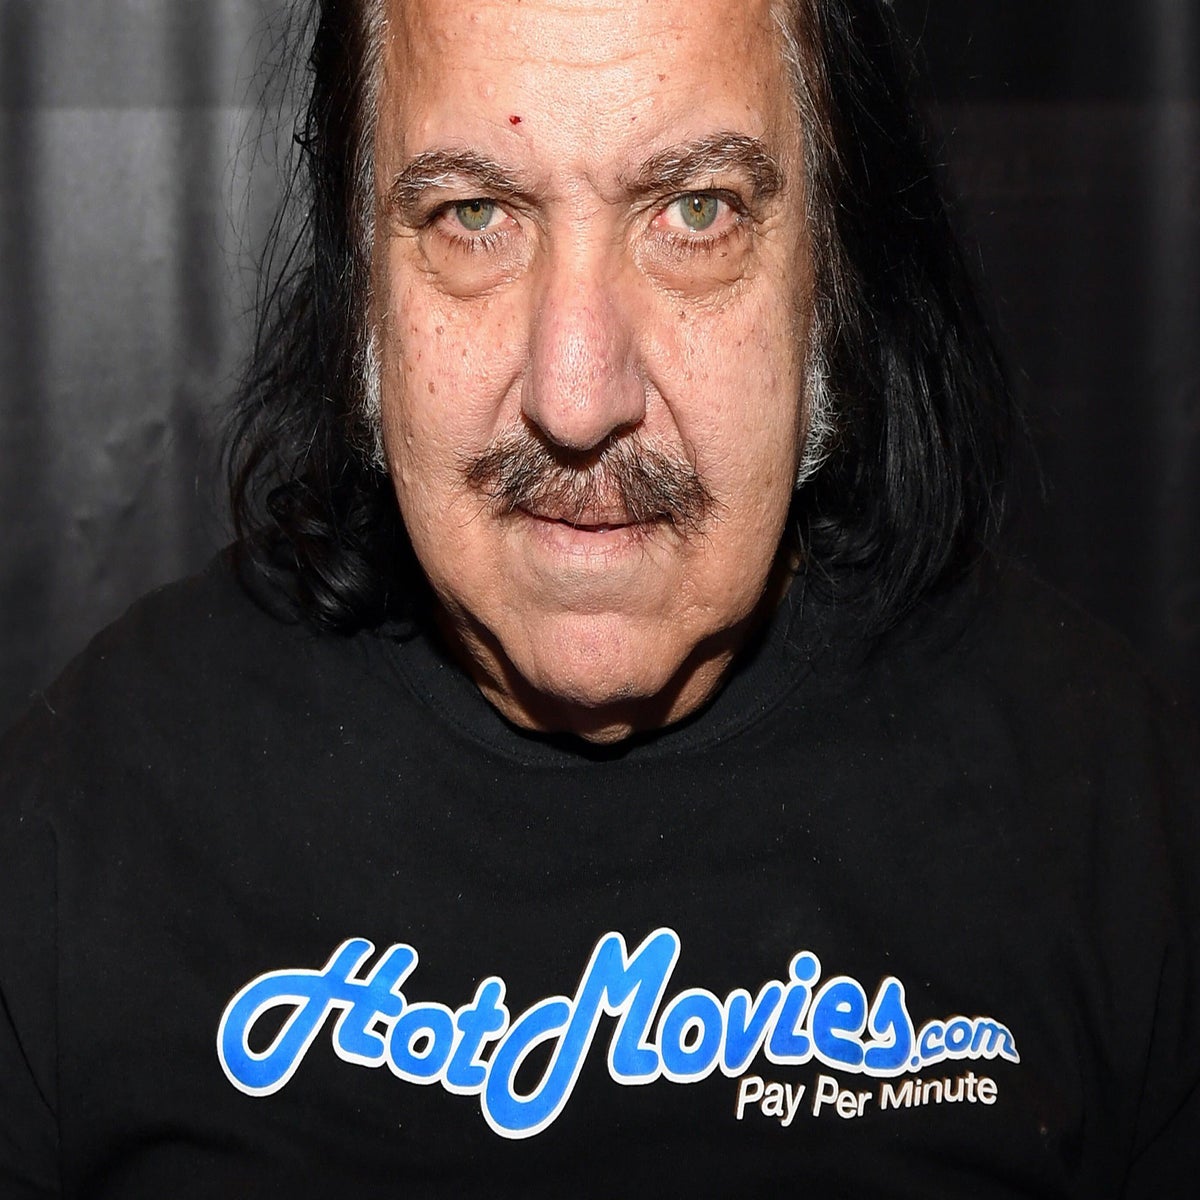 Xxx Indian Painful Gang Rape - Ron Jeremy is 'monster' who struggled to separate porn from reality,  victims claim | The Independent